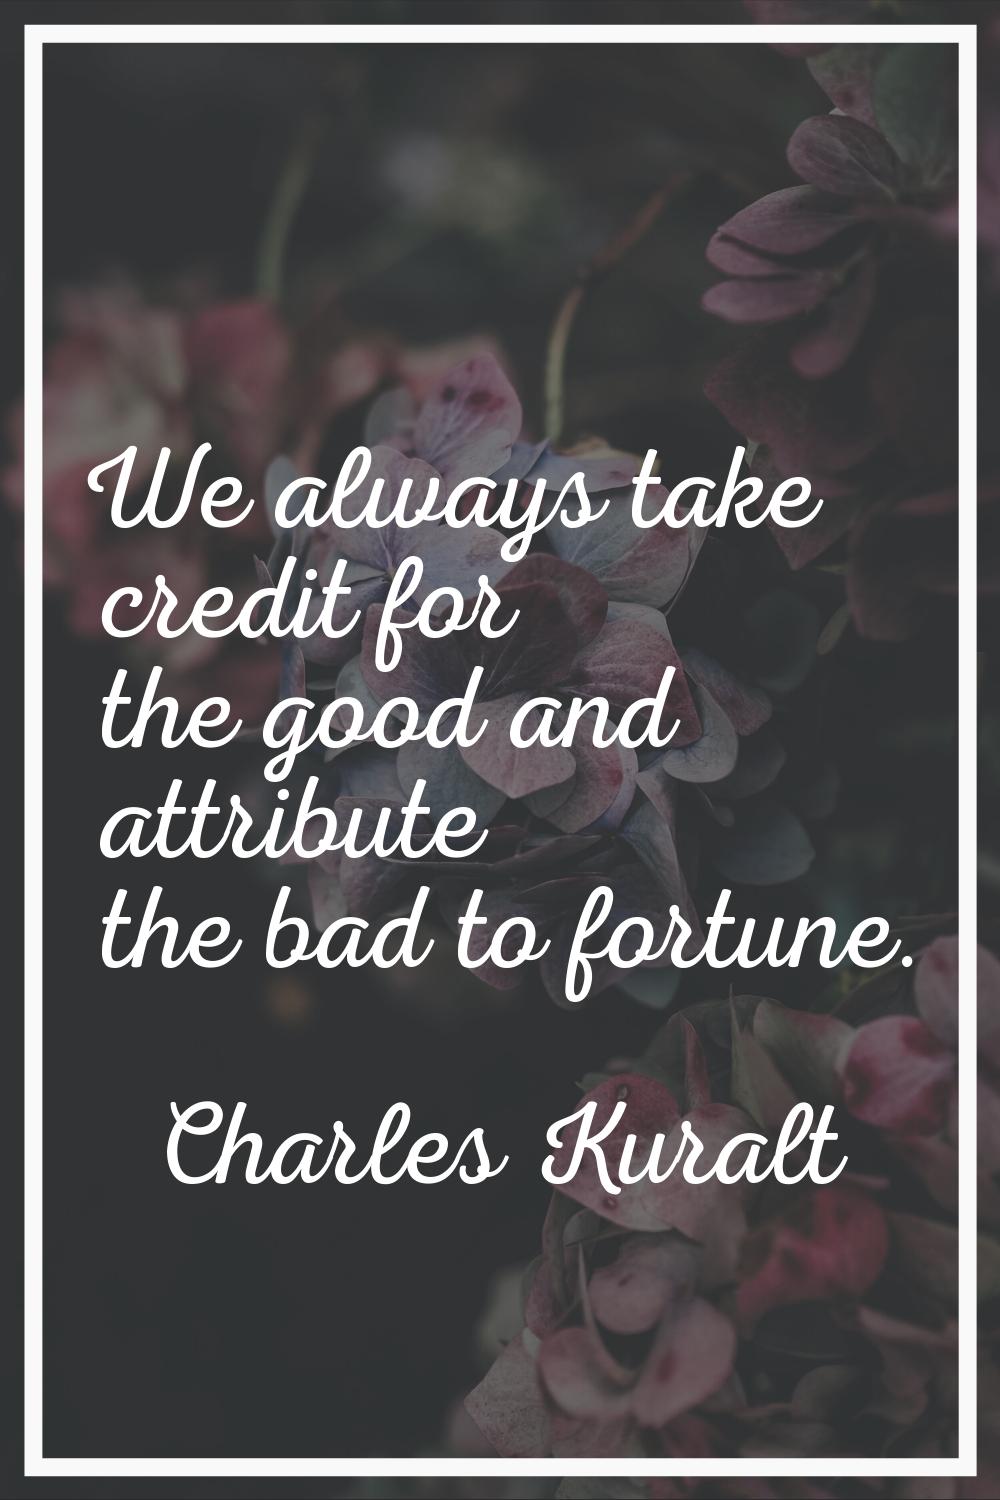 We always take credit for the good and attribute the bad to fortune.